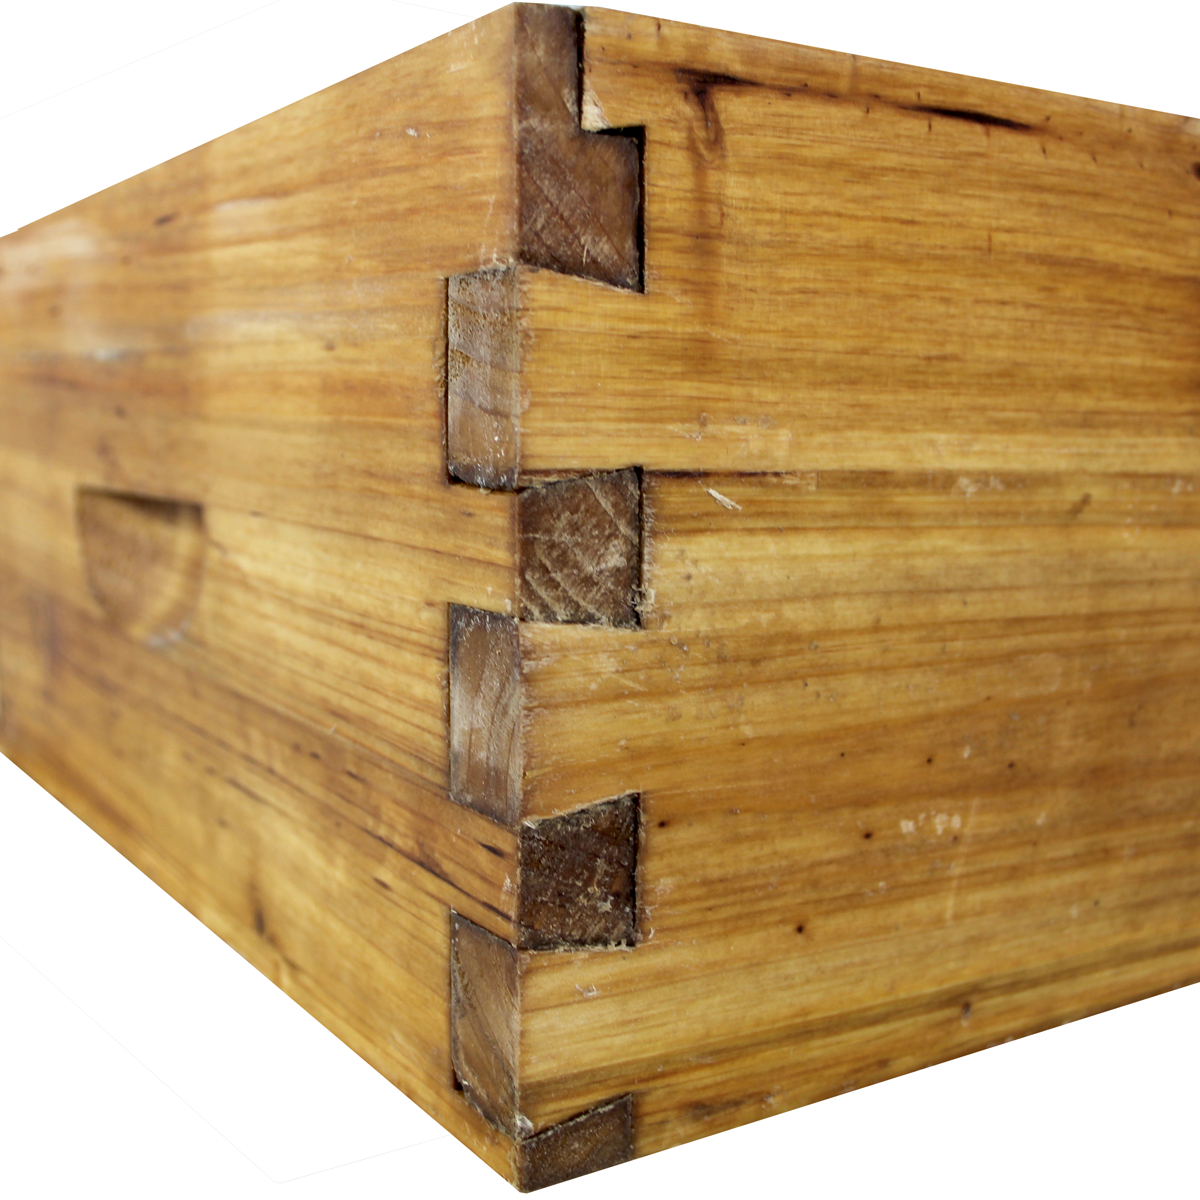 Hoover Hives Wax Coated 8 Frame Medium Bee Box Has Dovetails in Every Joint